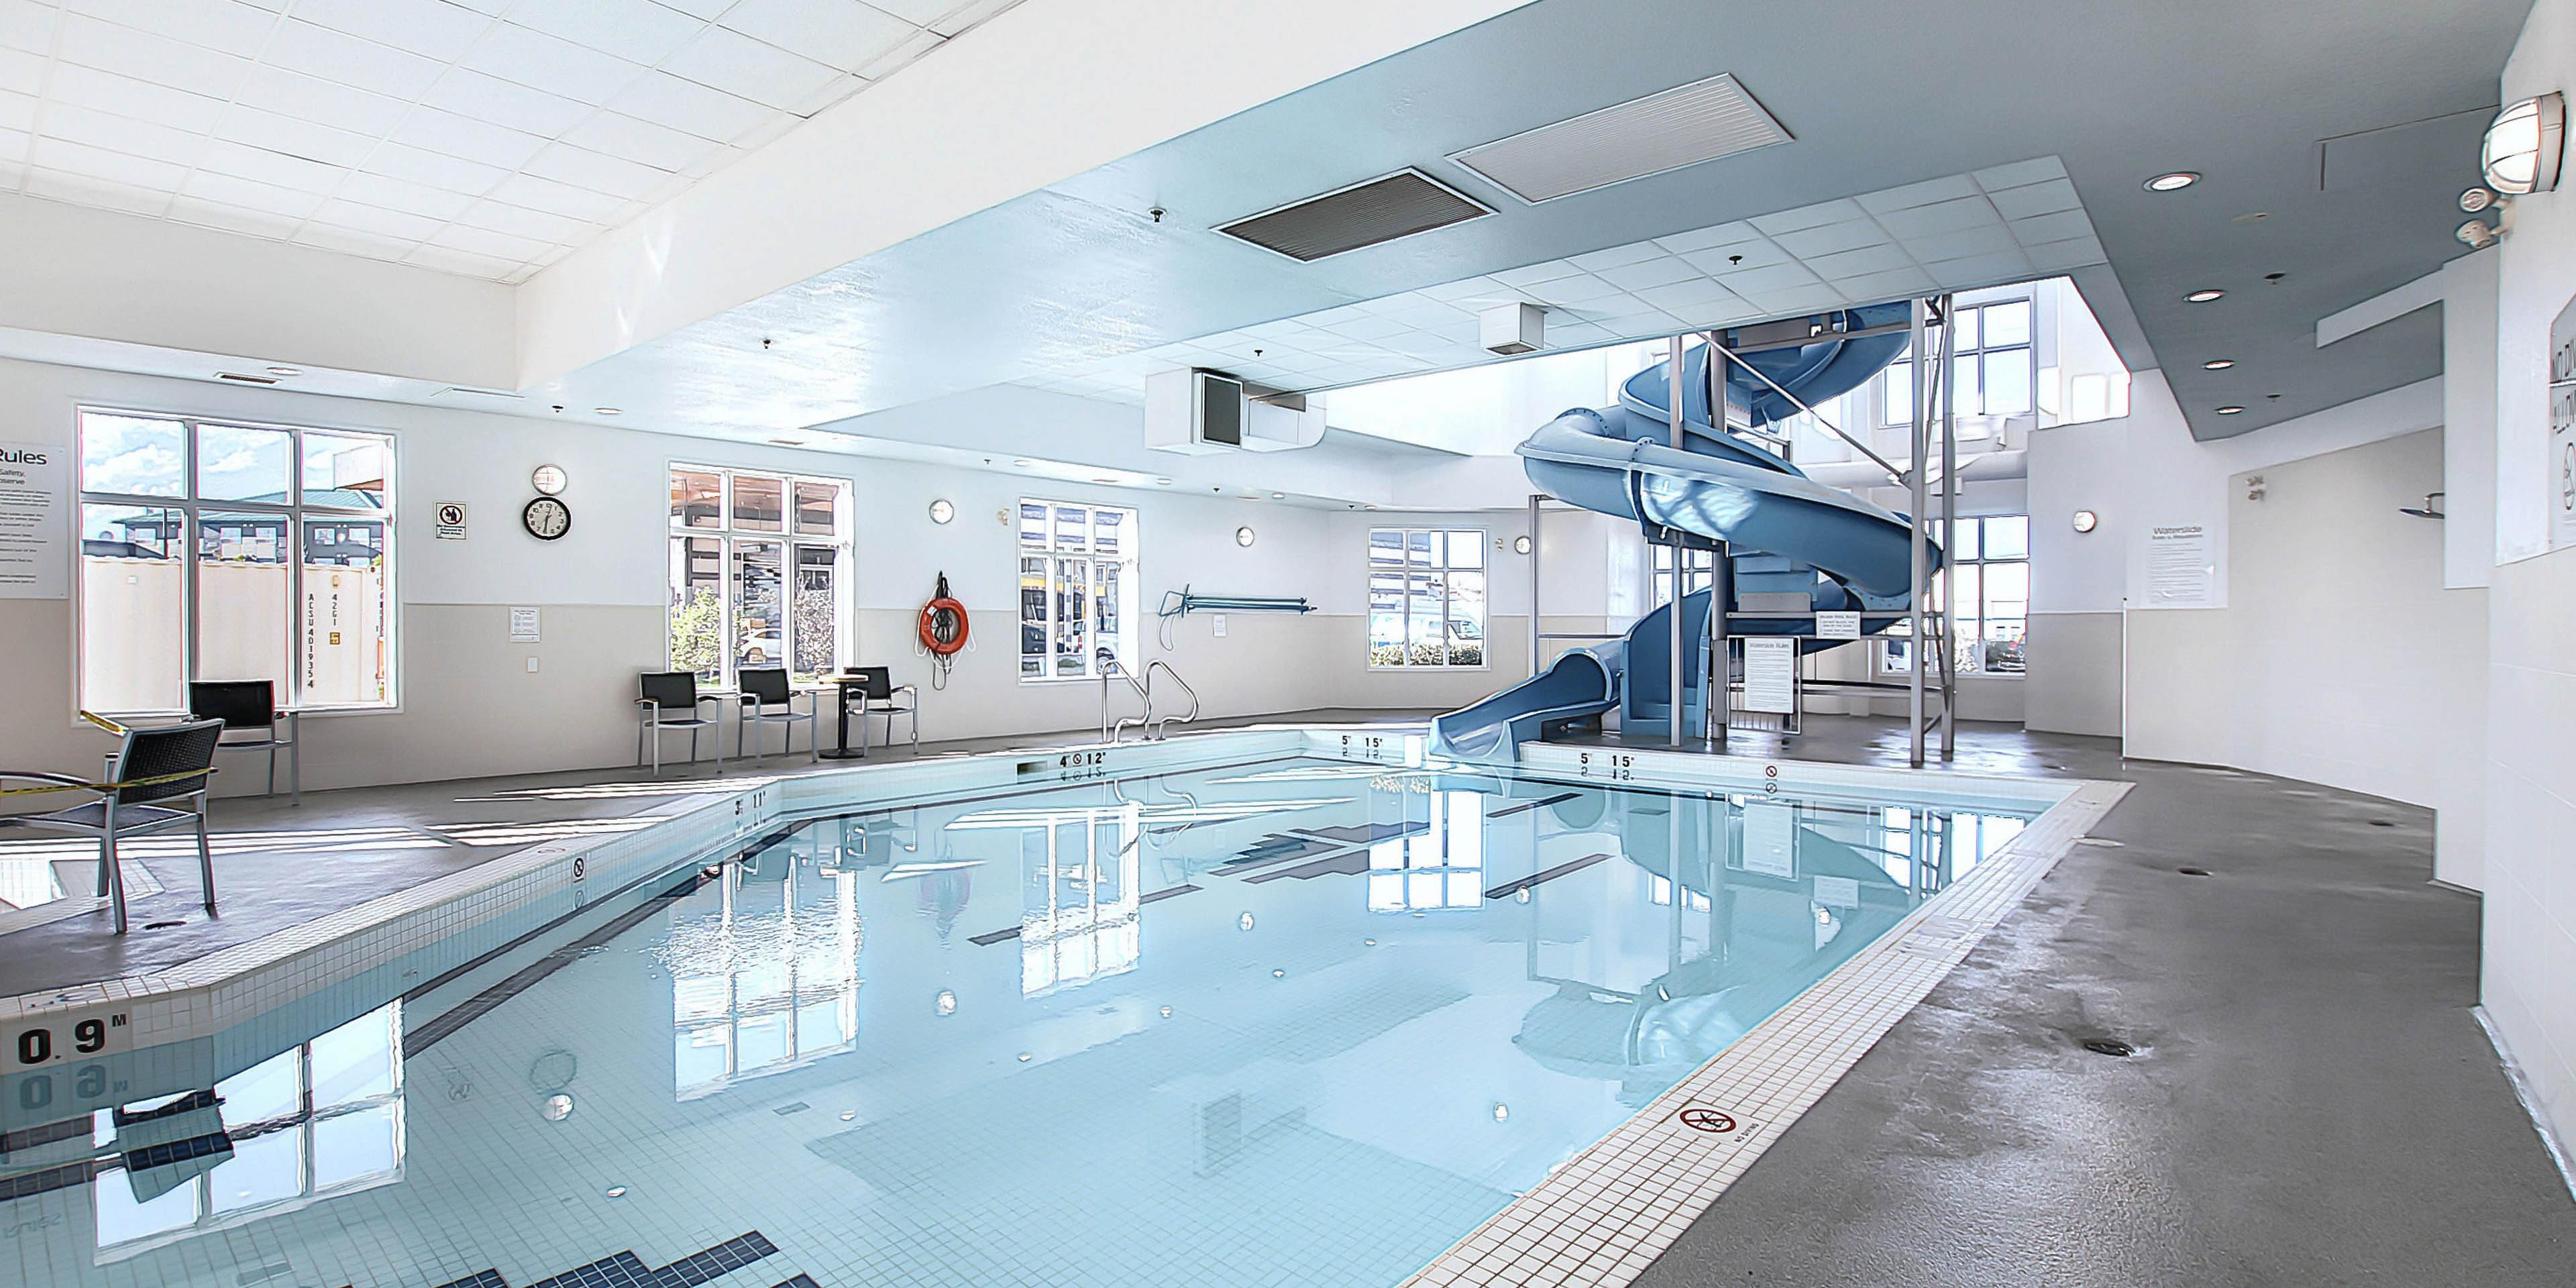 Our hotel features a heated indoor heated pool with waterslide and hot tub.   Stay fit in our onsite fitness center complete with treadmill, elliptical machines, free weights and stationary bicycle.